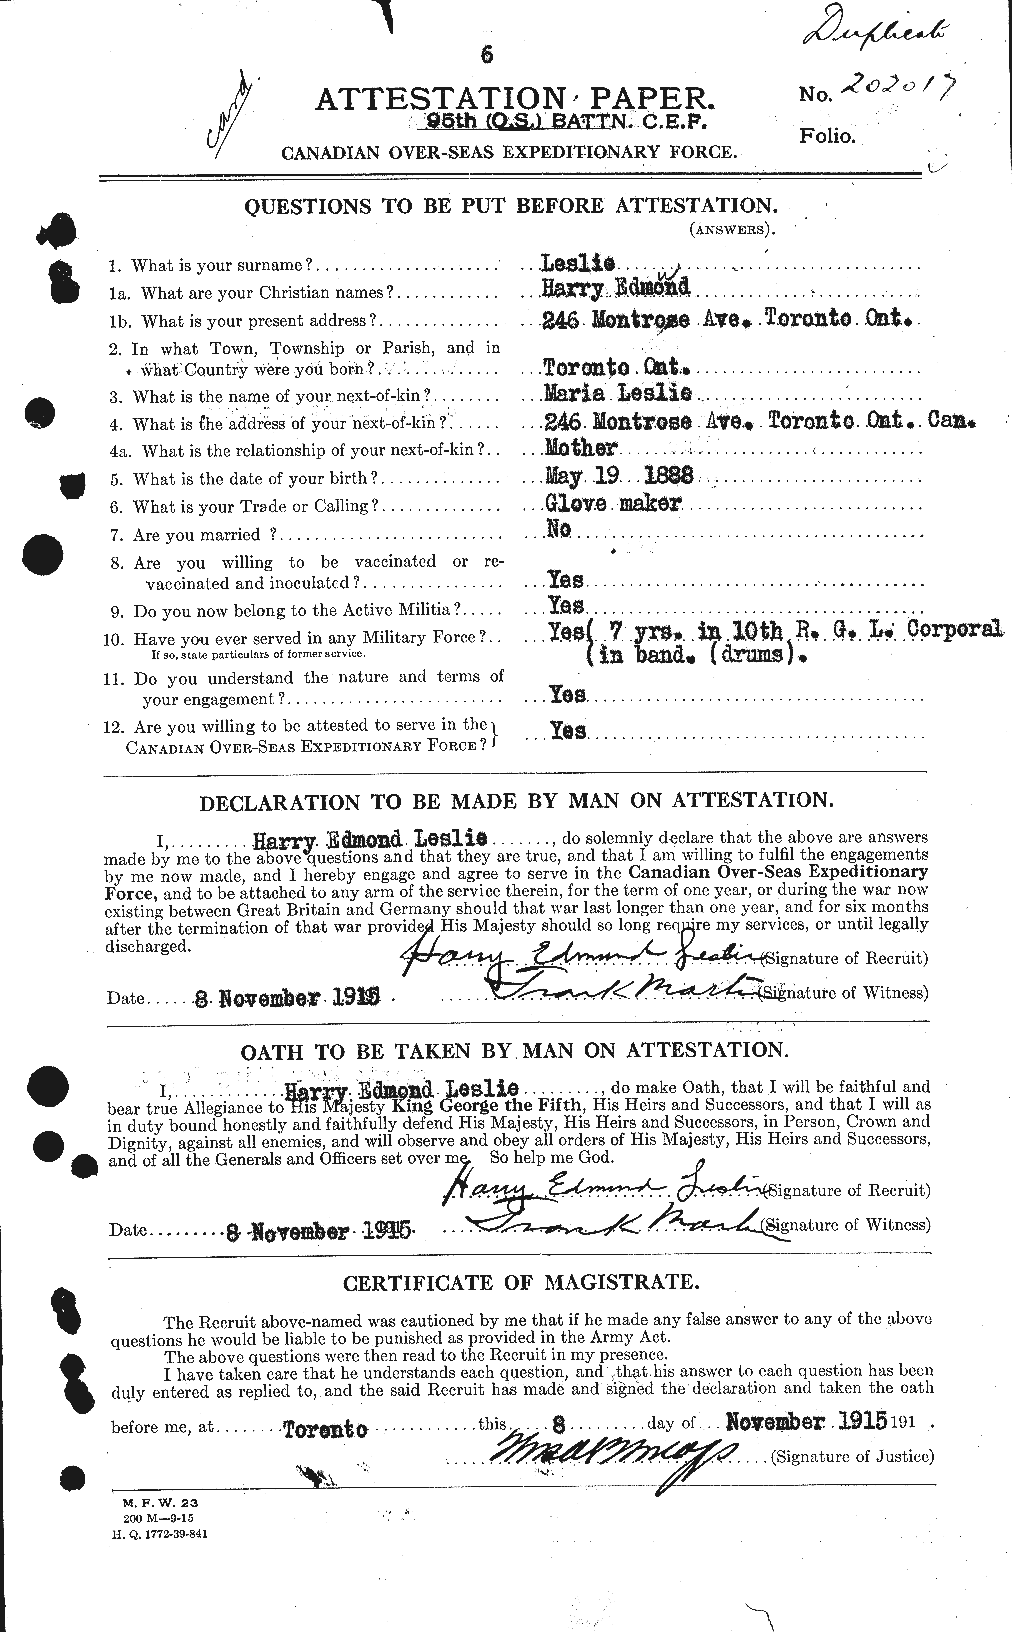 Personnel Records of the First World War - CEF 459811a